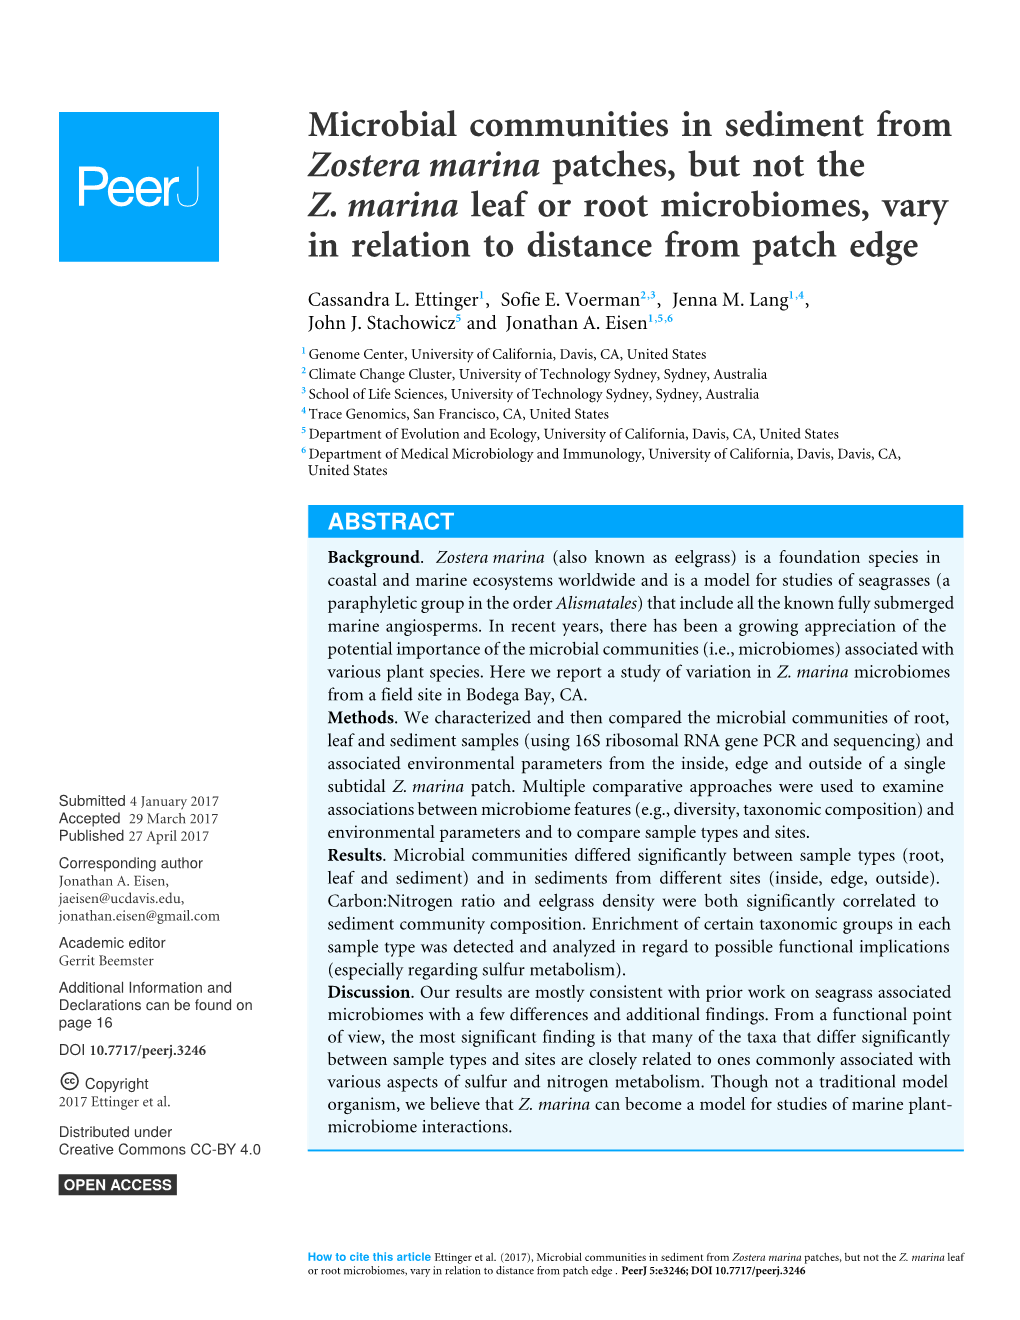 Microbial Communities in Sediment from Zostera Marina Patches, but Not the Z. Marina Leaf Or Root Microbiomes, Vary in Relation to Distance from Patch Edge